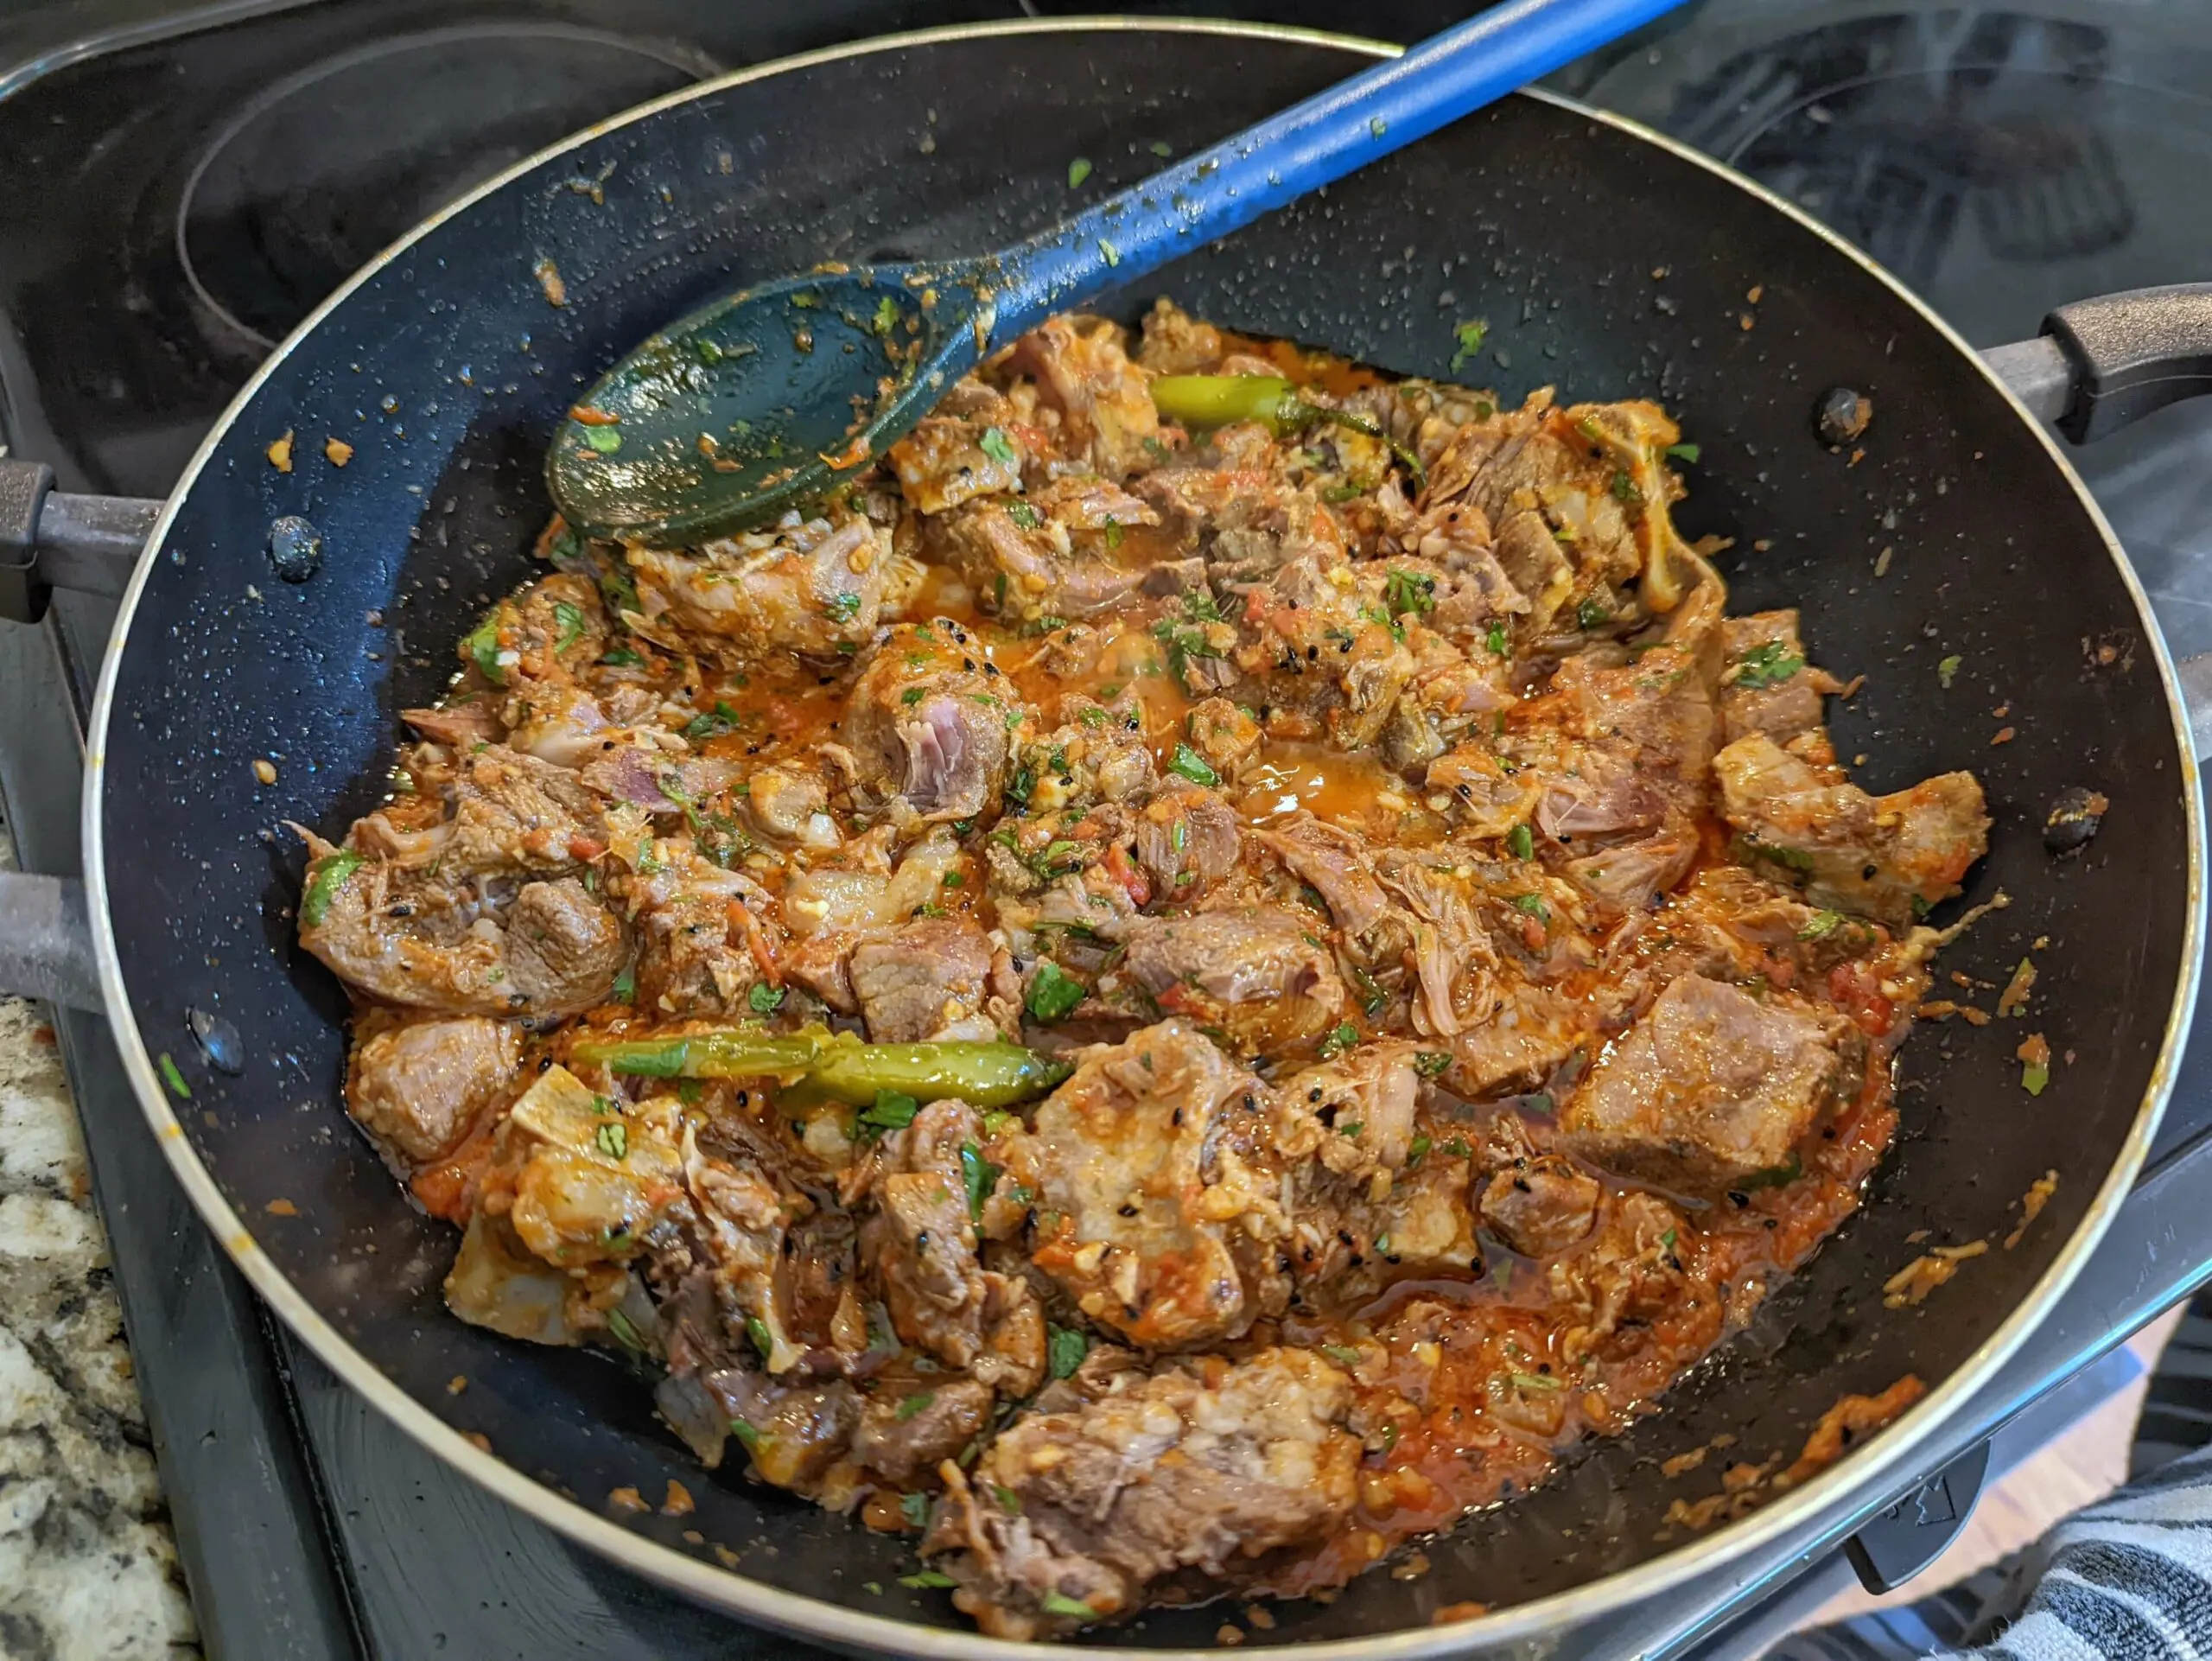 Stir and simmer the karahi gosht to allow the ingredients to incorporate.